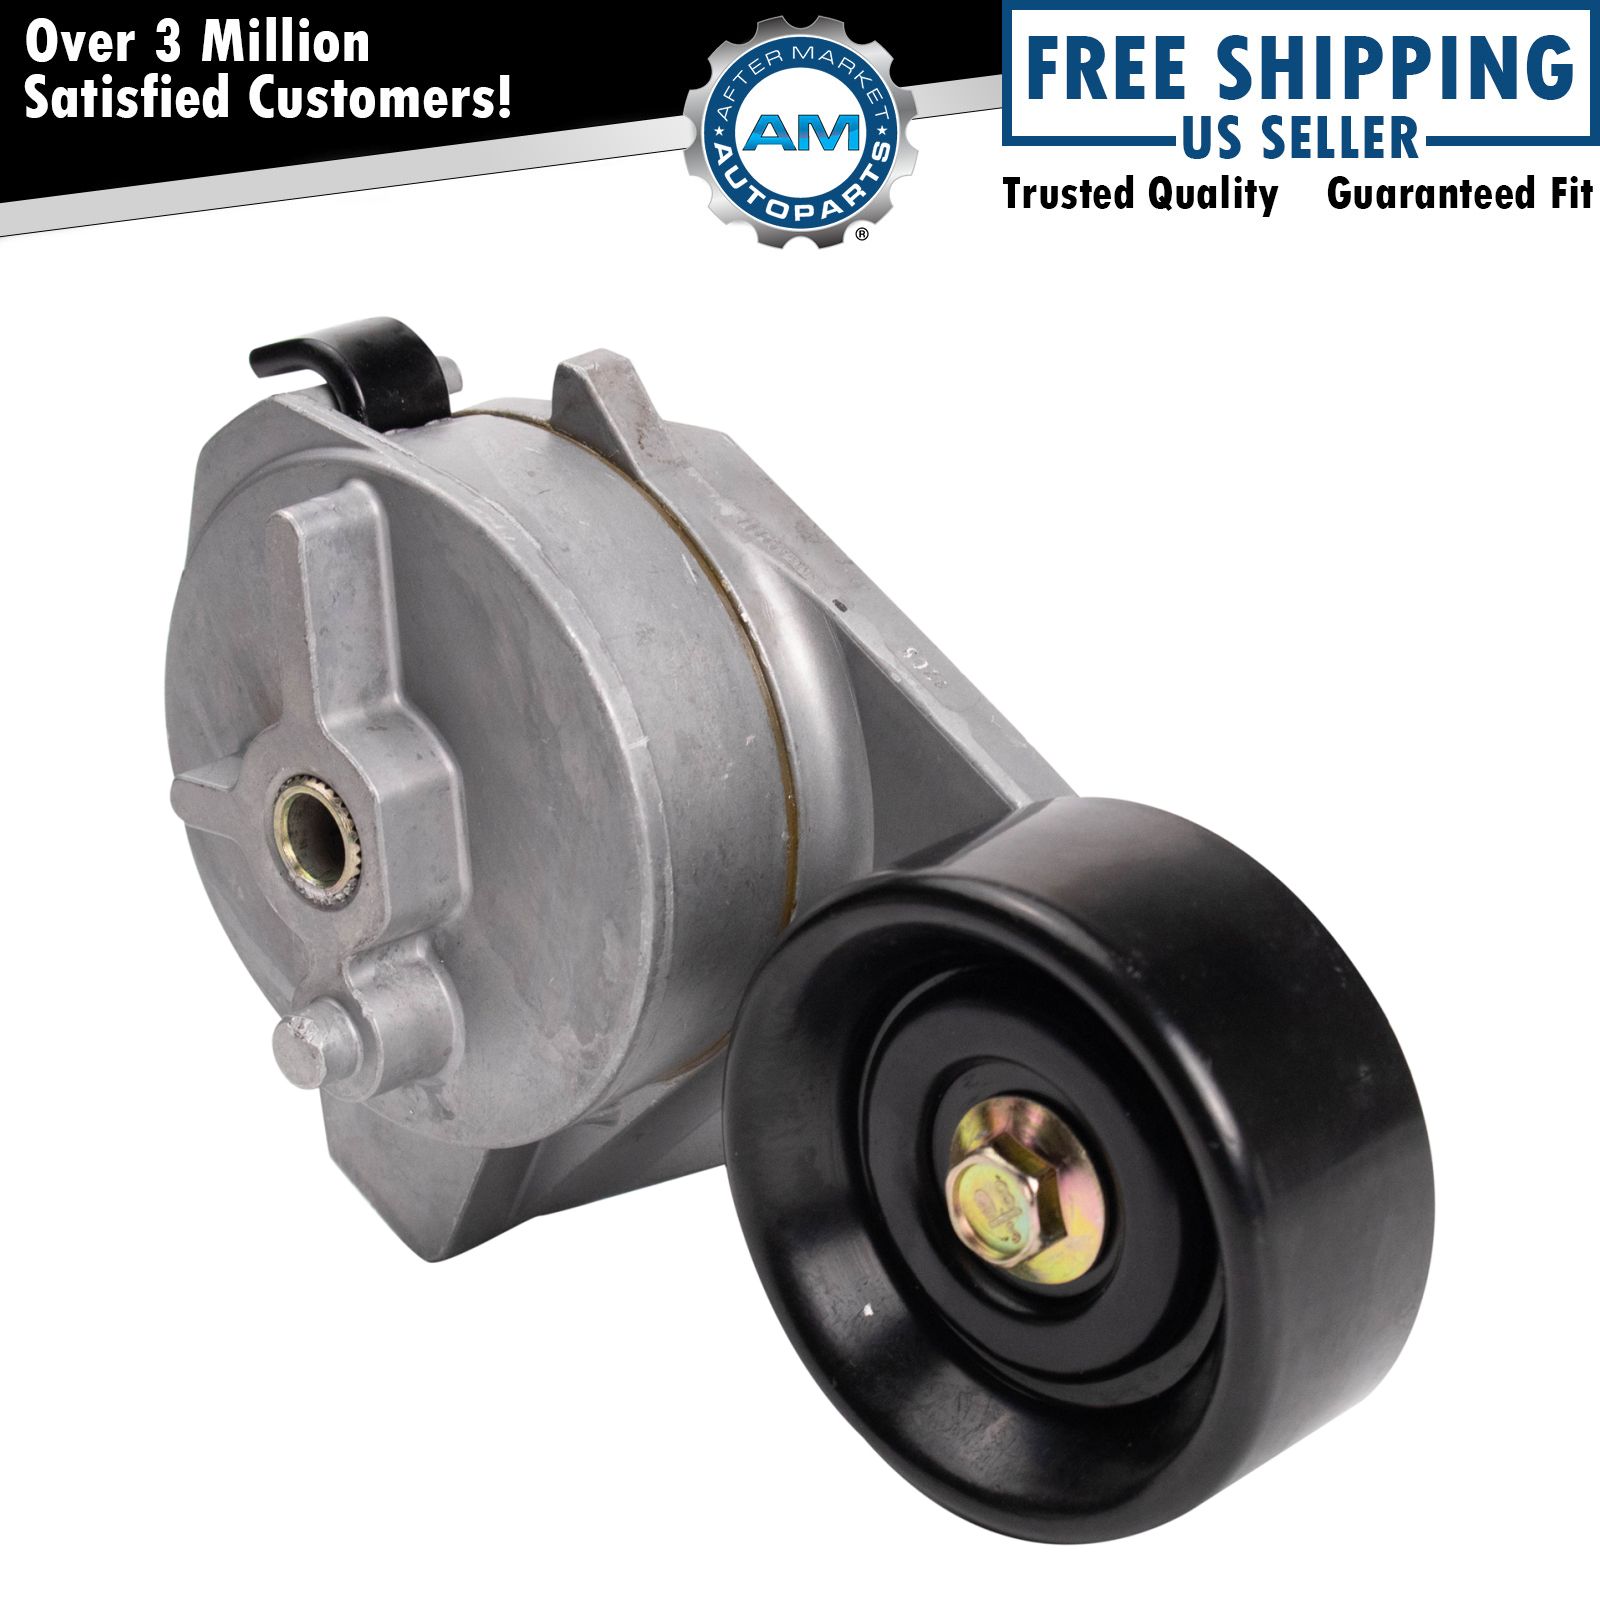 Serpentine Belt Tensioner with Pulley Wheel for Buick Cadillac Olds Pontiac